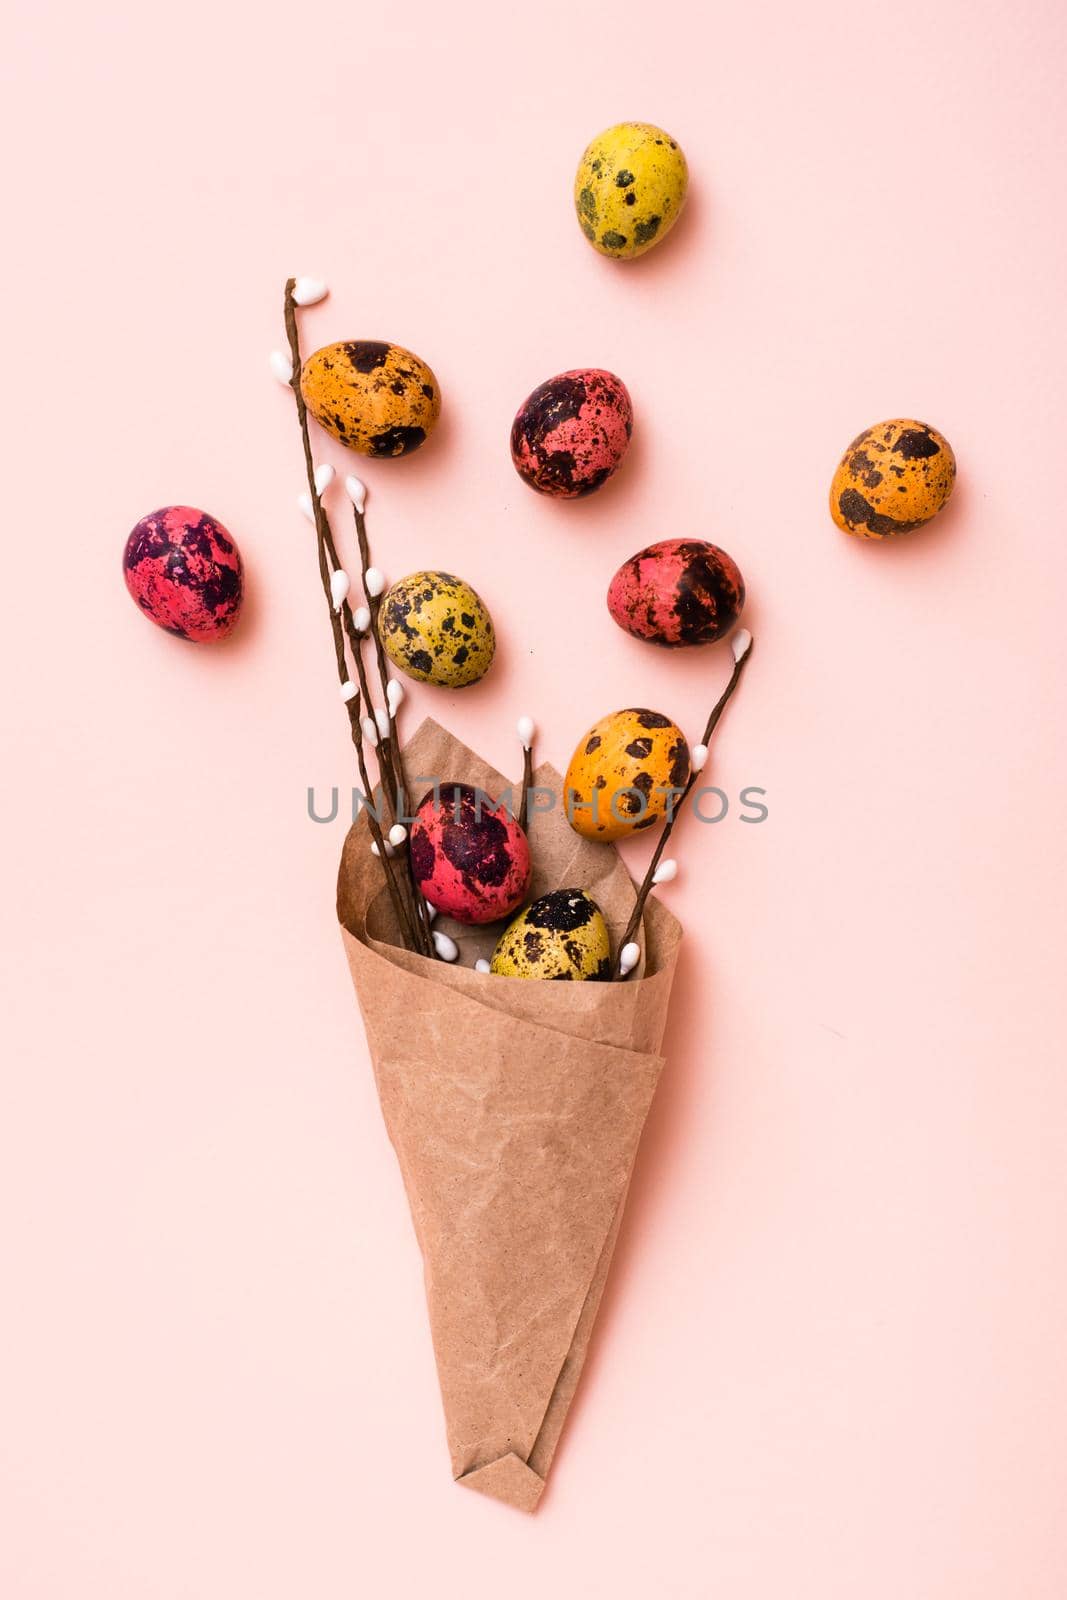 Happy Easter. Bouquet of painted quail eggs and pussy willow branches wrapped in brown paper on pink background. Vertical view